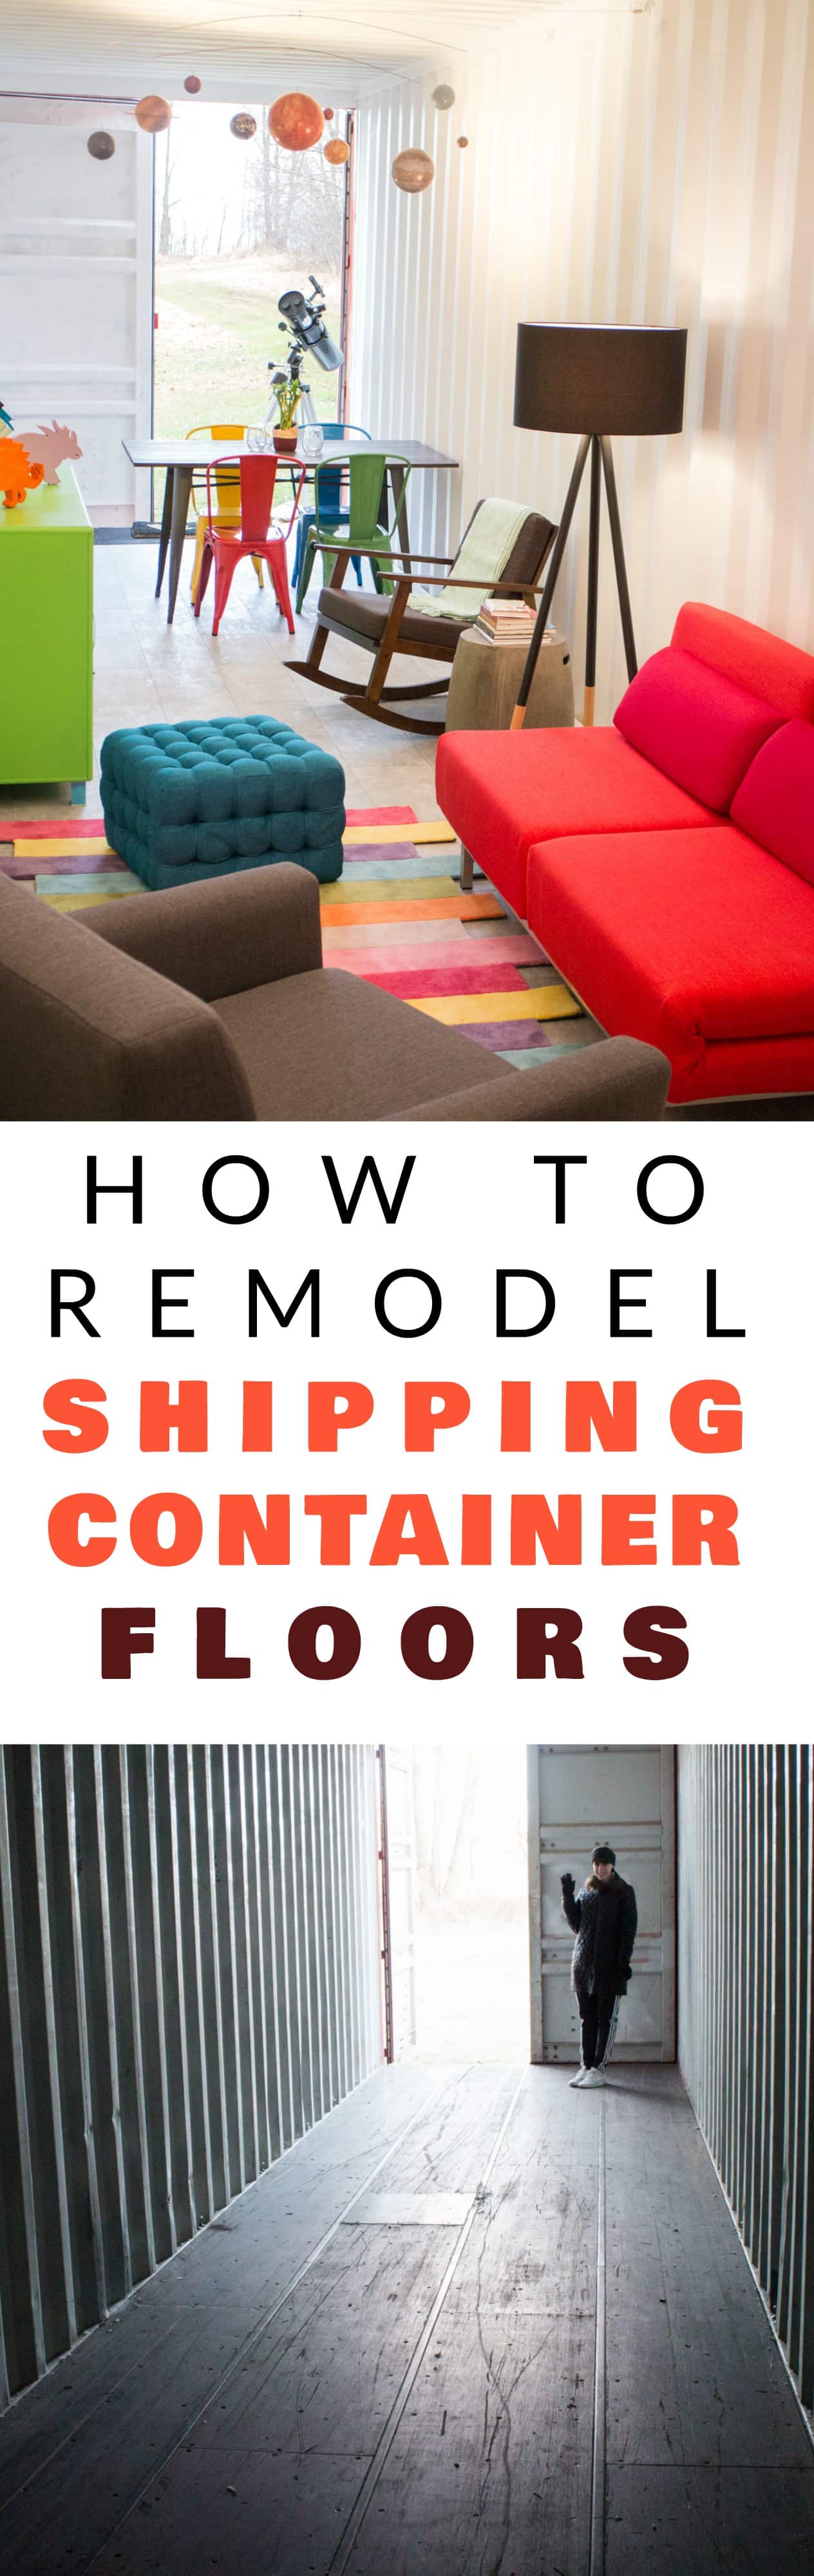 How to remodel a shipping container's floor to make it move in ready. Find out how to easily refinish the floors on a budget to turn it into your modern dream home! Great design inspiration and cost info for your shipping container house! 